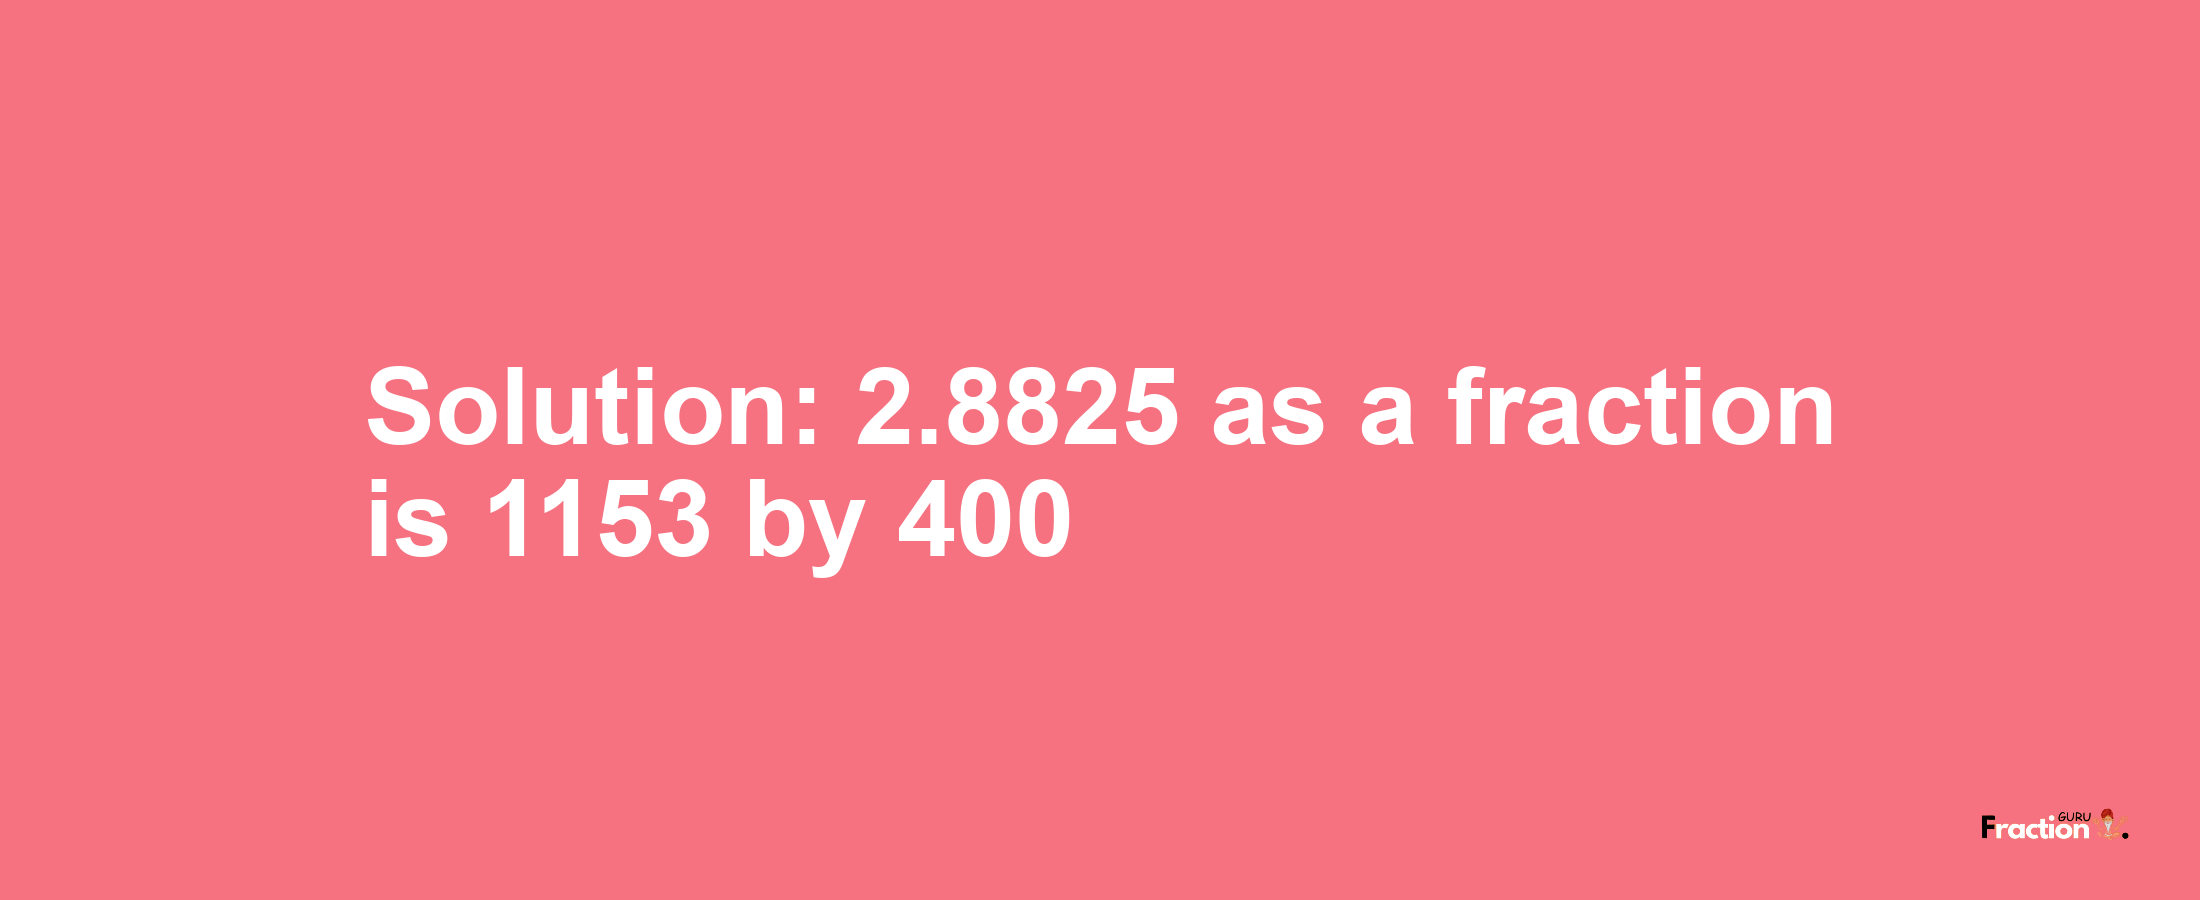 Solution:2.8825 as a fraction is 1153/400